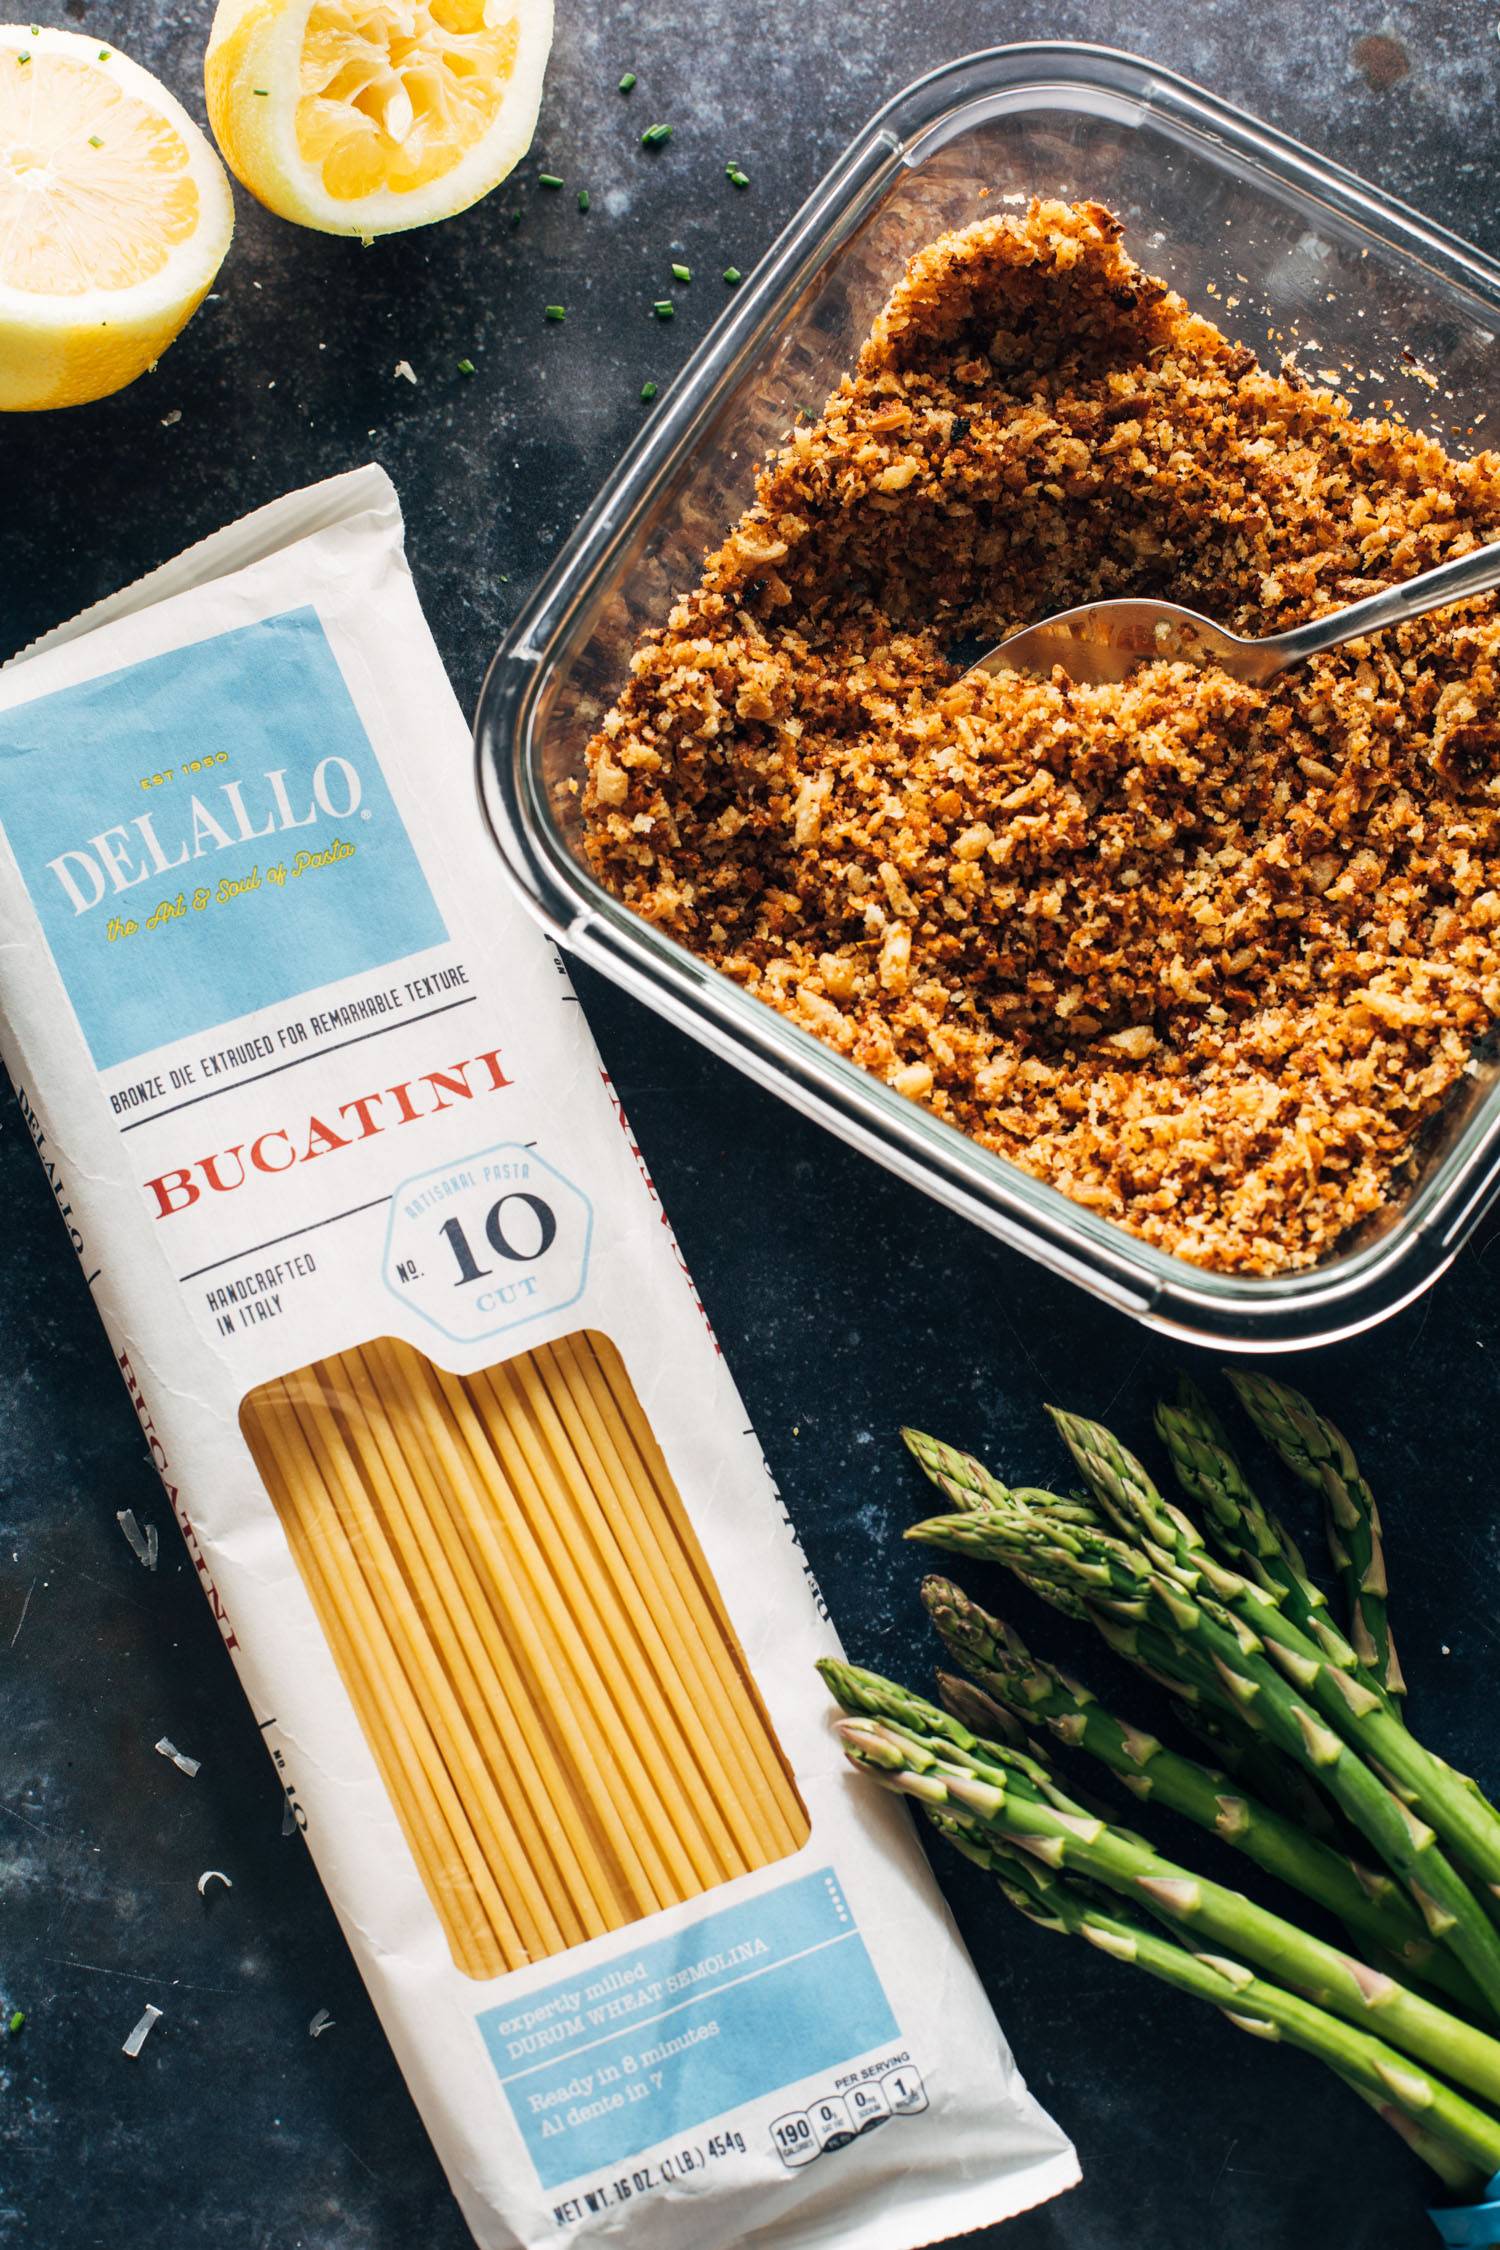 On top of pasta, bread crumbs and asparagus